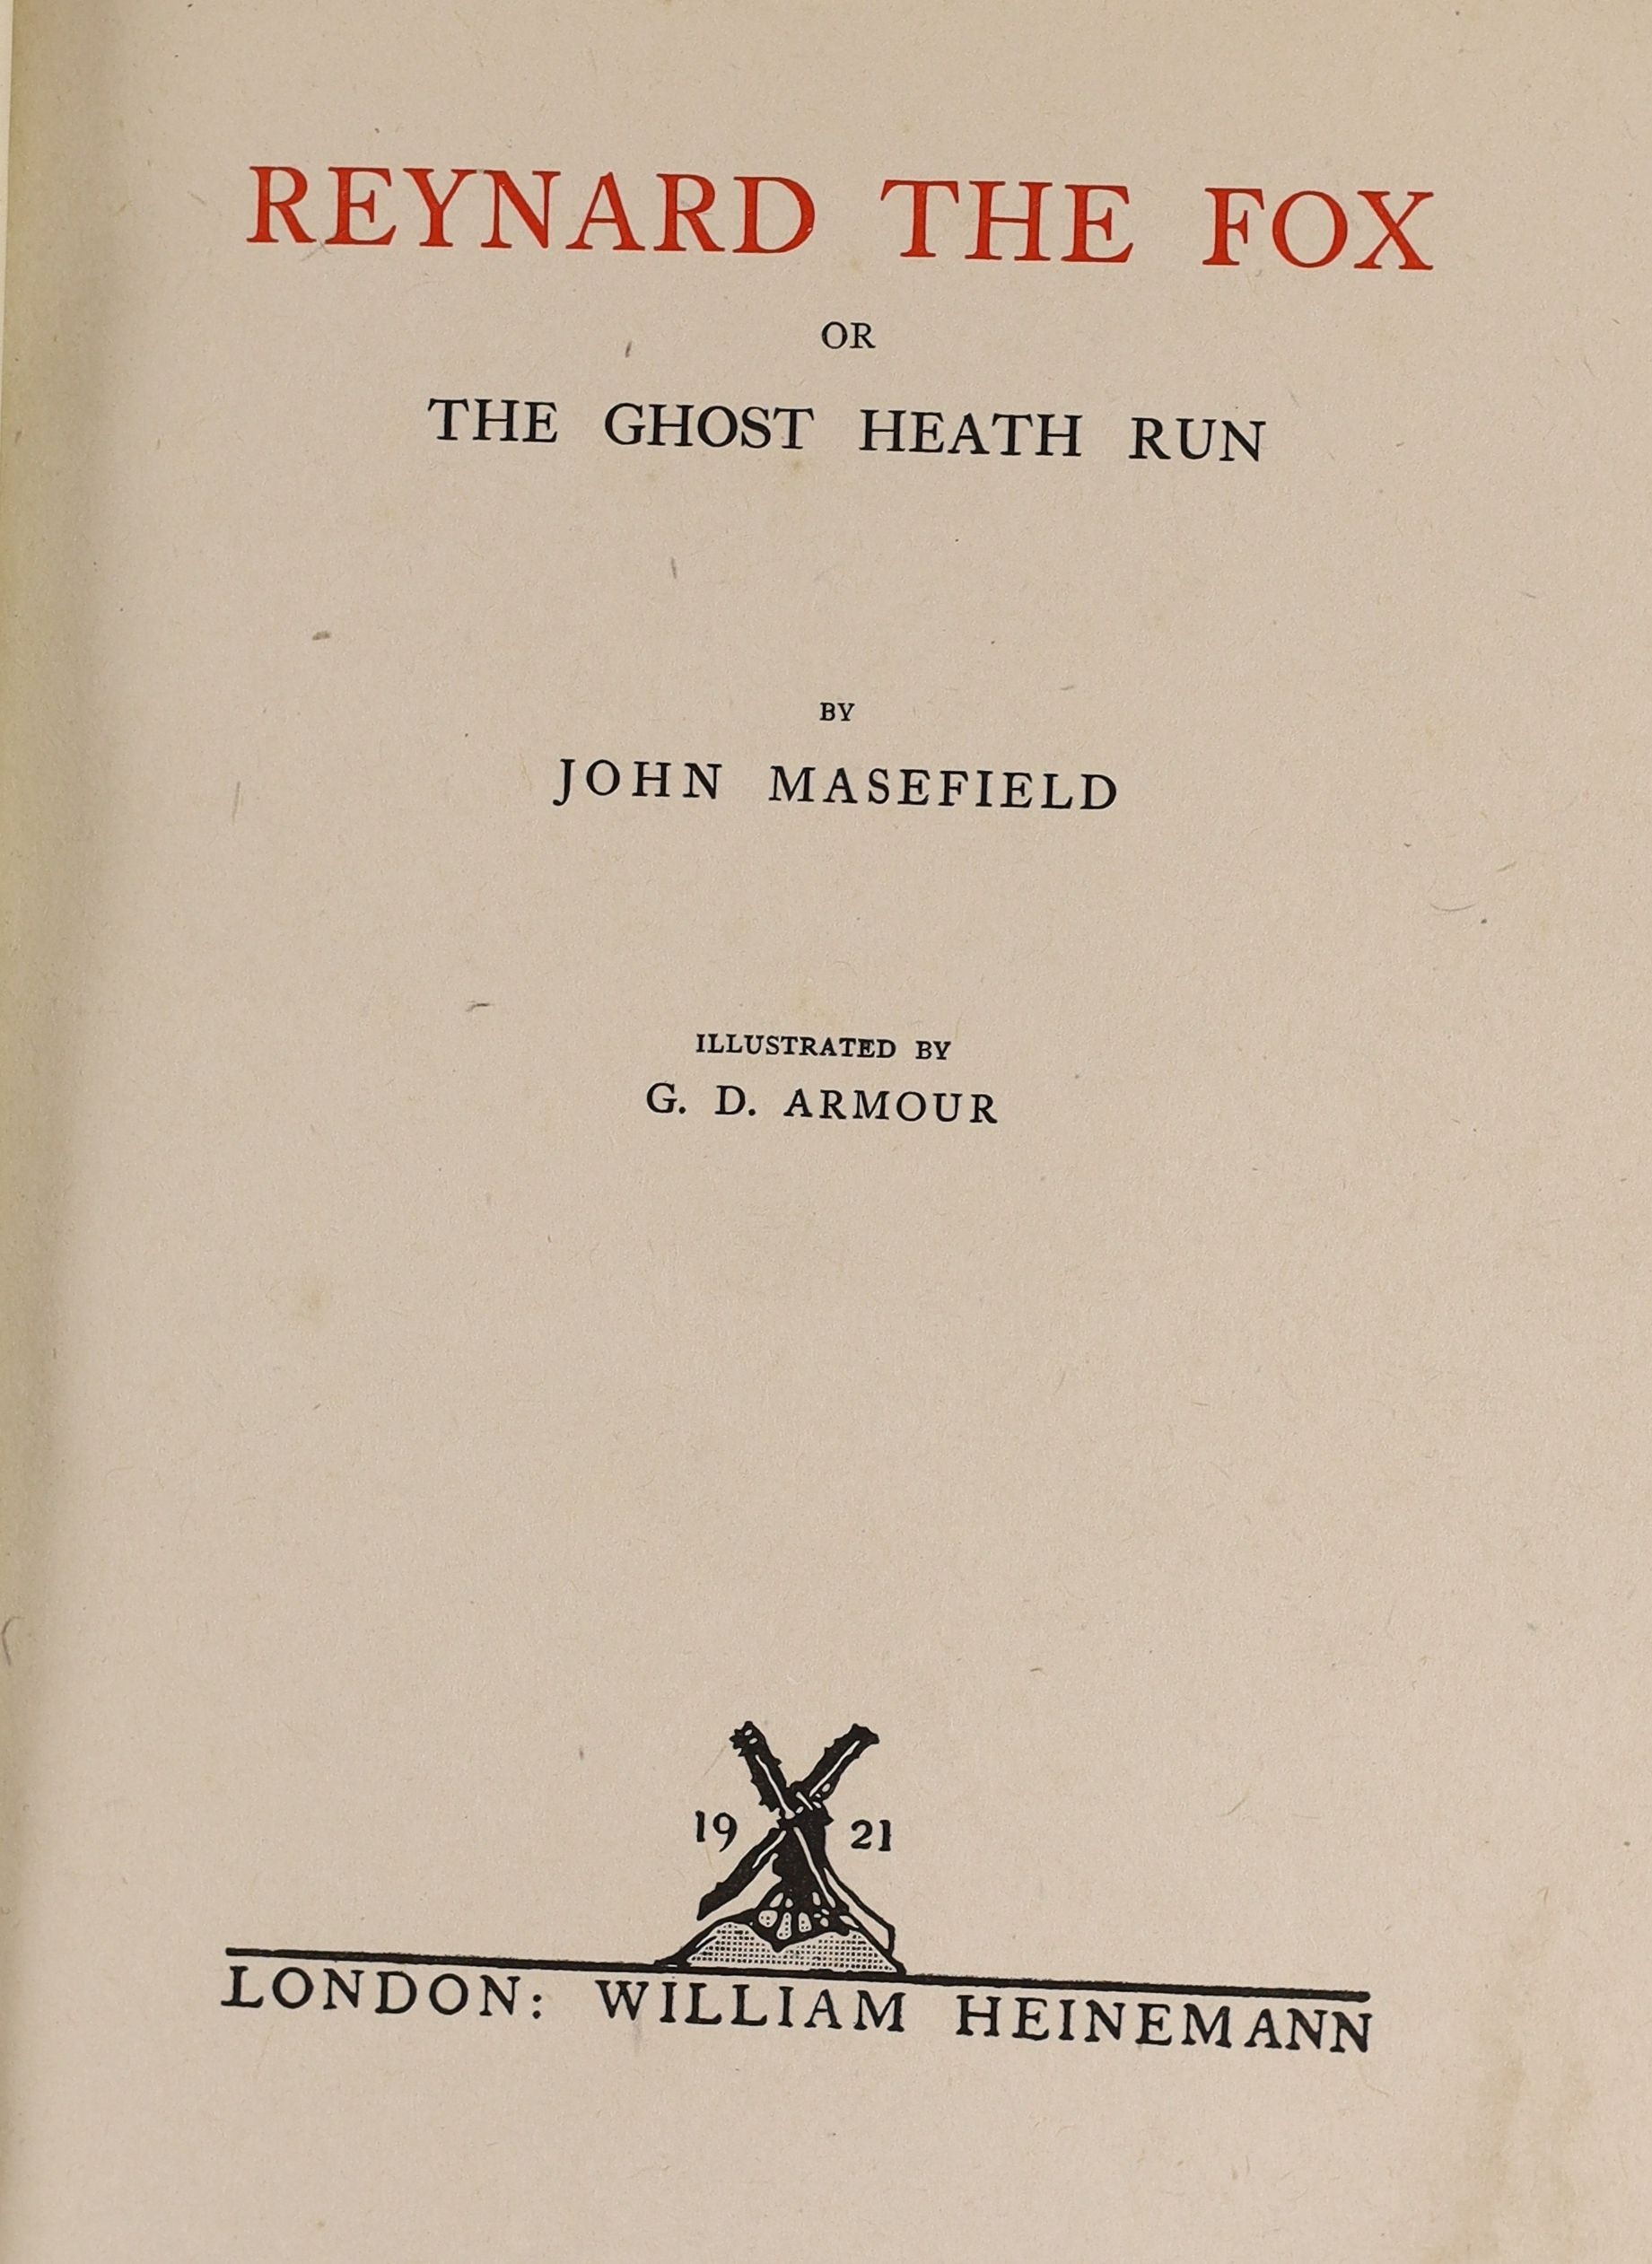 Masefield, John - Reynard the Fox, illustrated by G.D. Armour, 4to, half morocco, ink presentation inscription to front inner board, William Heinemann, London, 1921; Fore’s Sporting Notes & Sketches, vol. 1 only, London,